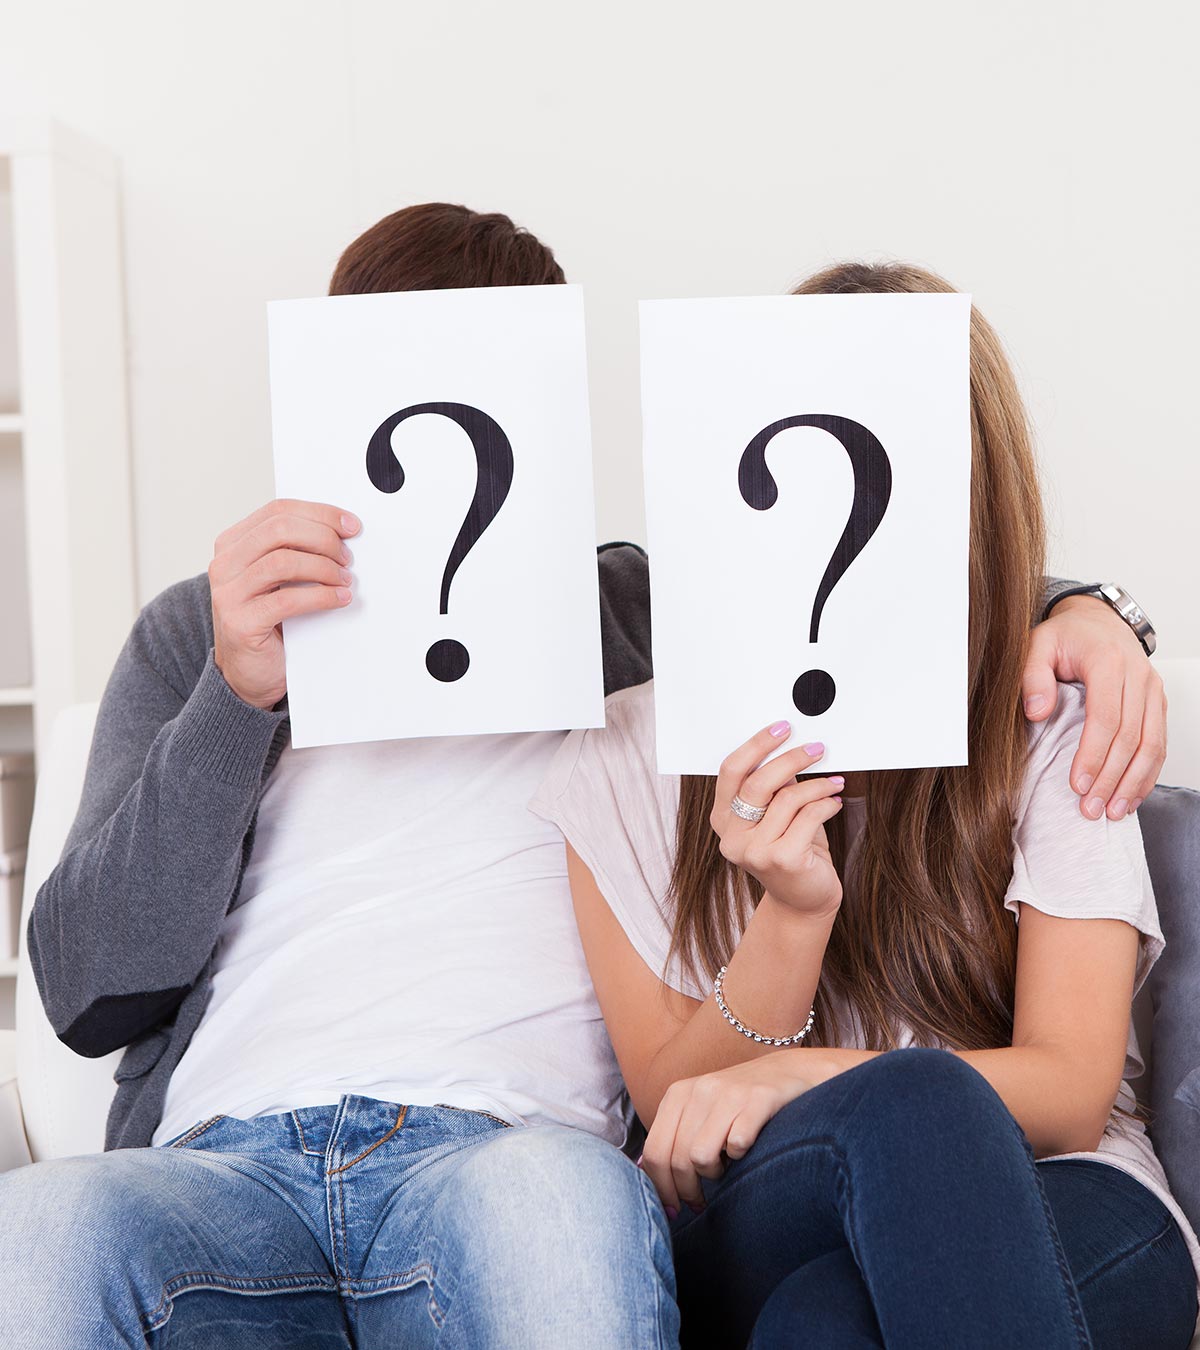 100 Intimate And Funny Questions To Ask Your Partner